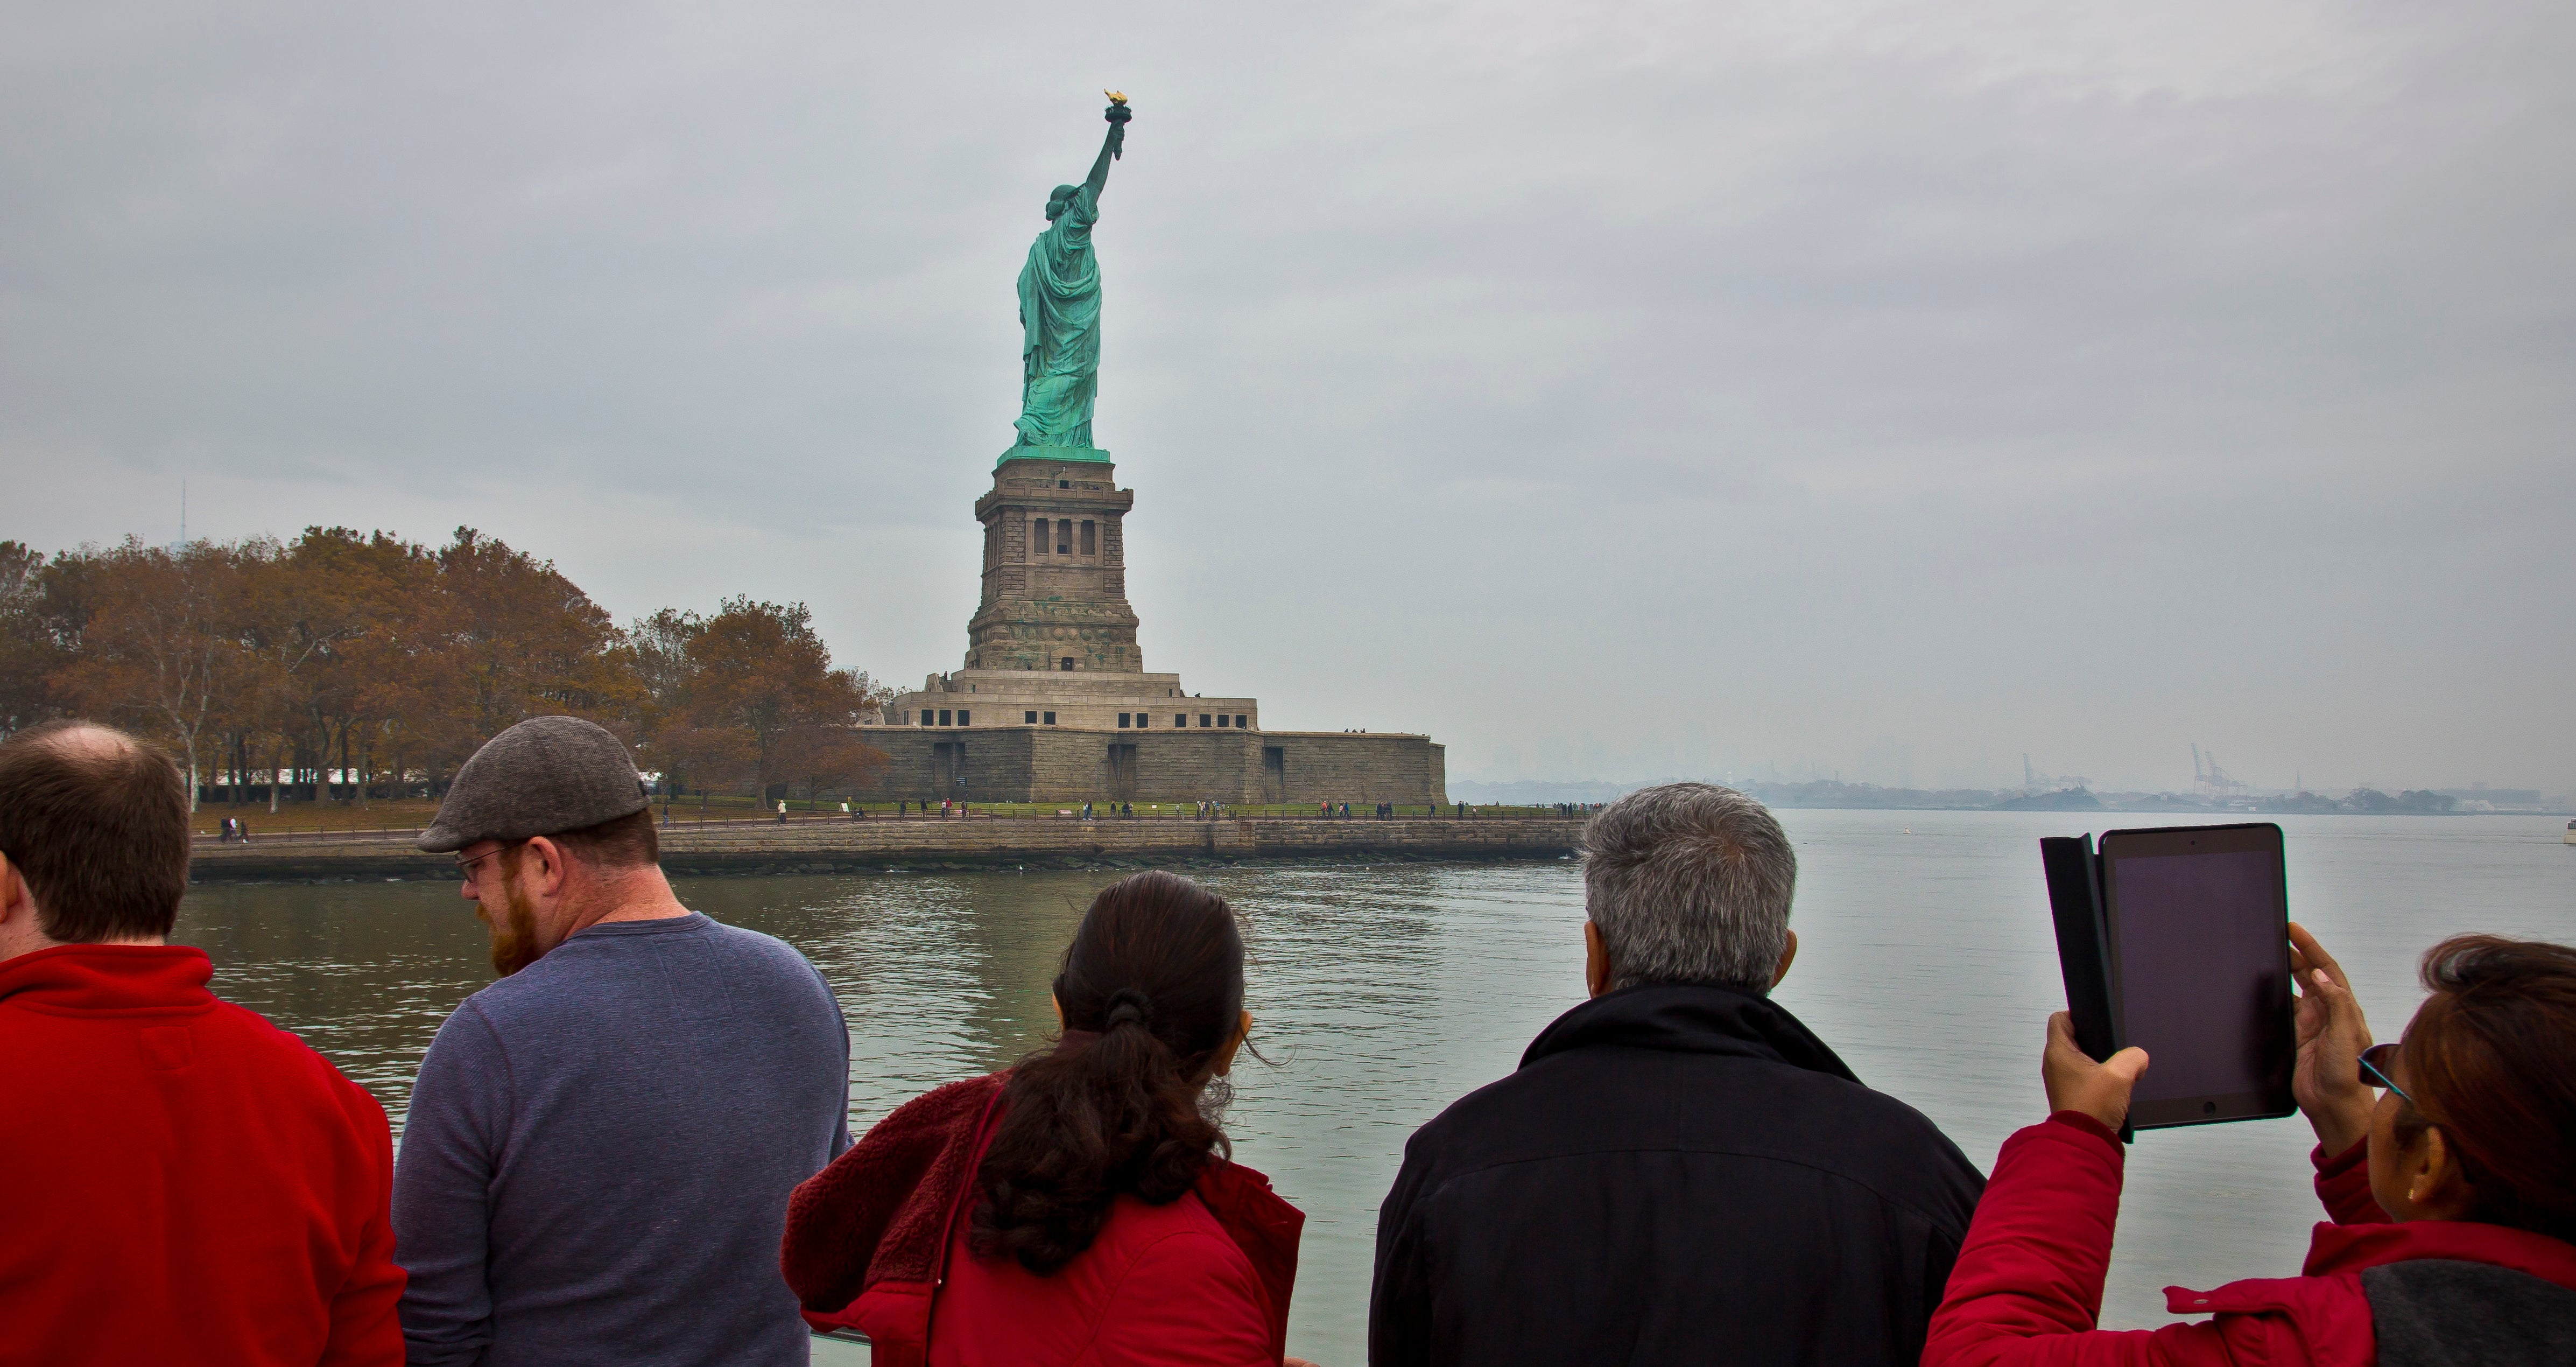  Visitors view the Statue of Liberty during a ferry ride to Liberty Island in New York. (AP Photo/Bebeto Matthews, File) 